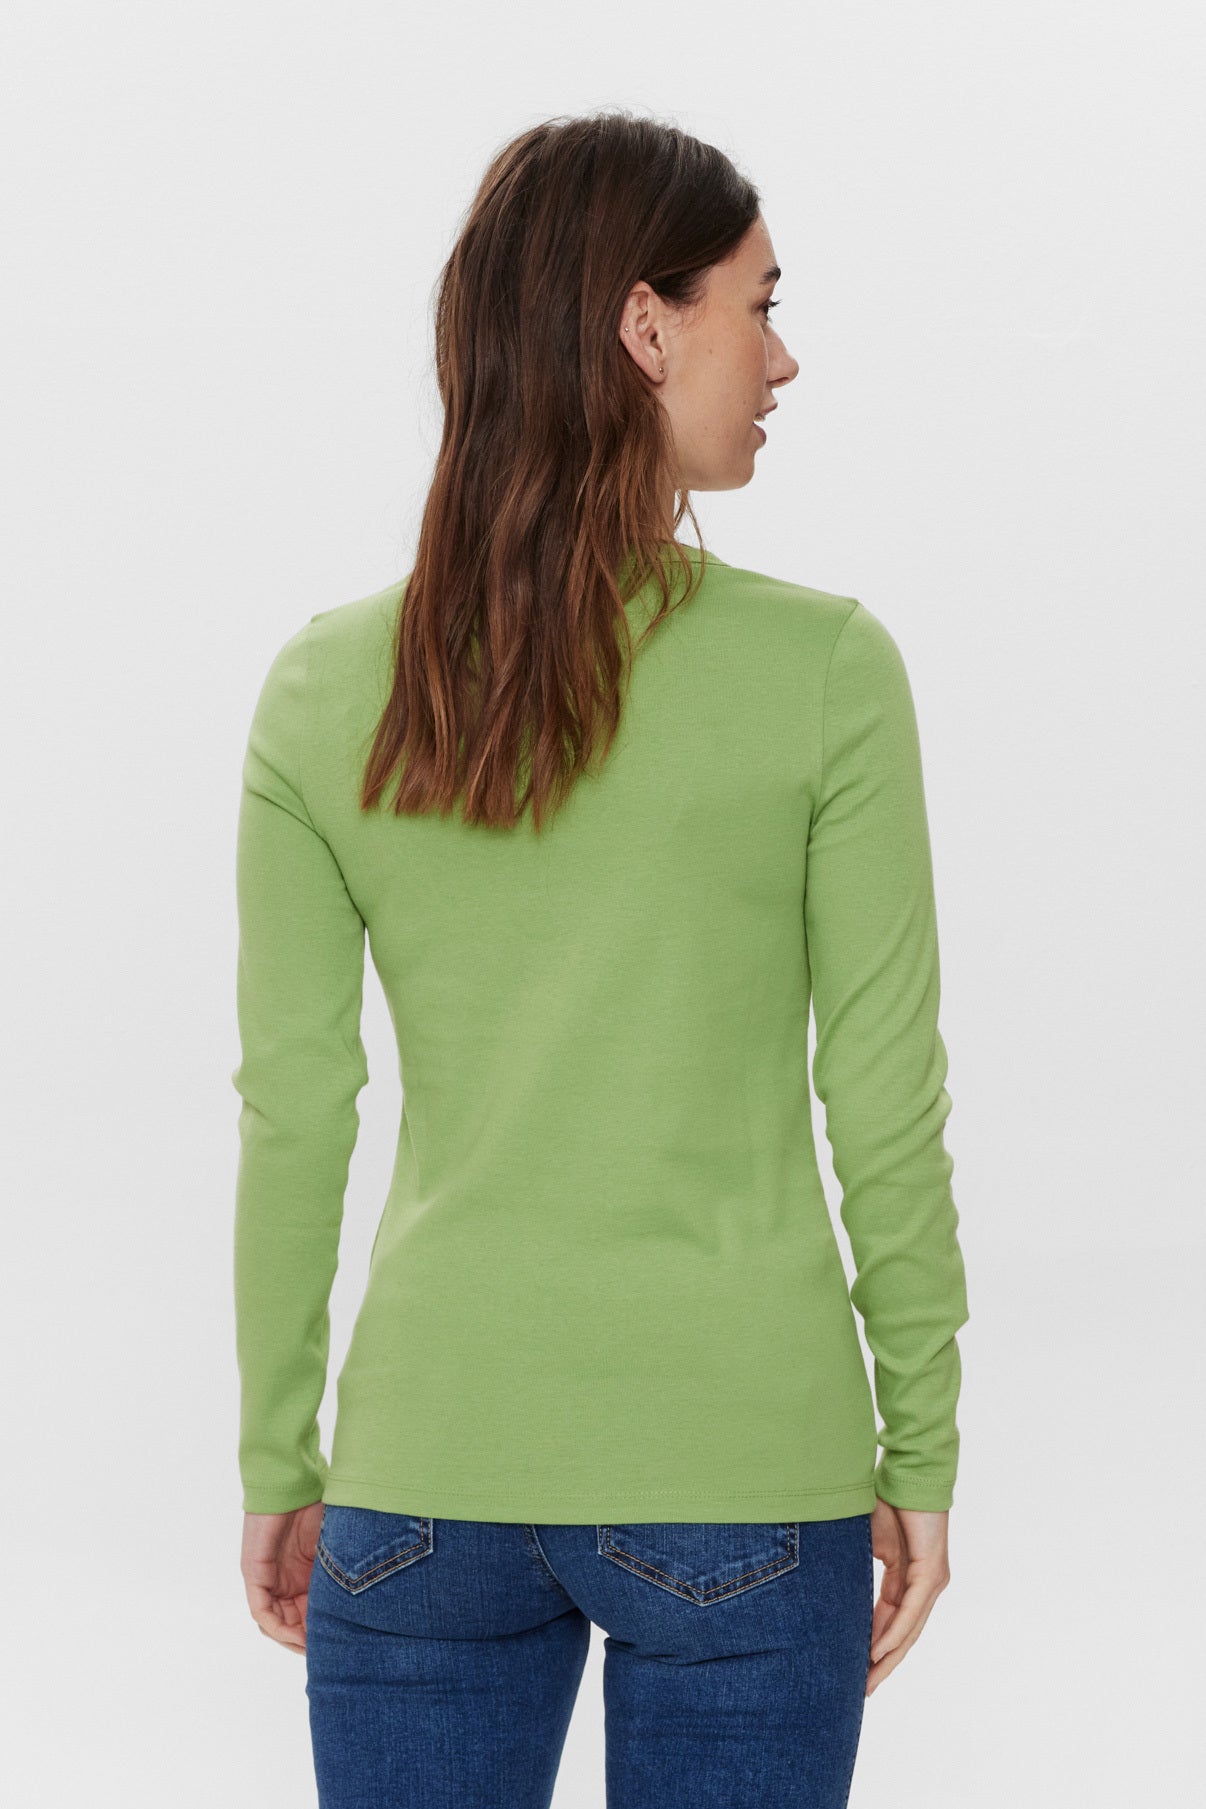 THERESE T-shirt L/S Camille 9619